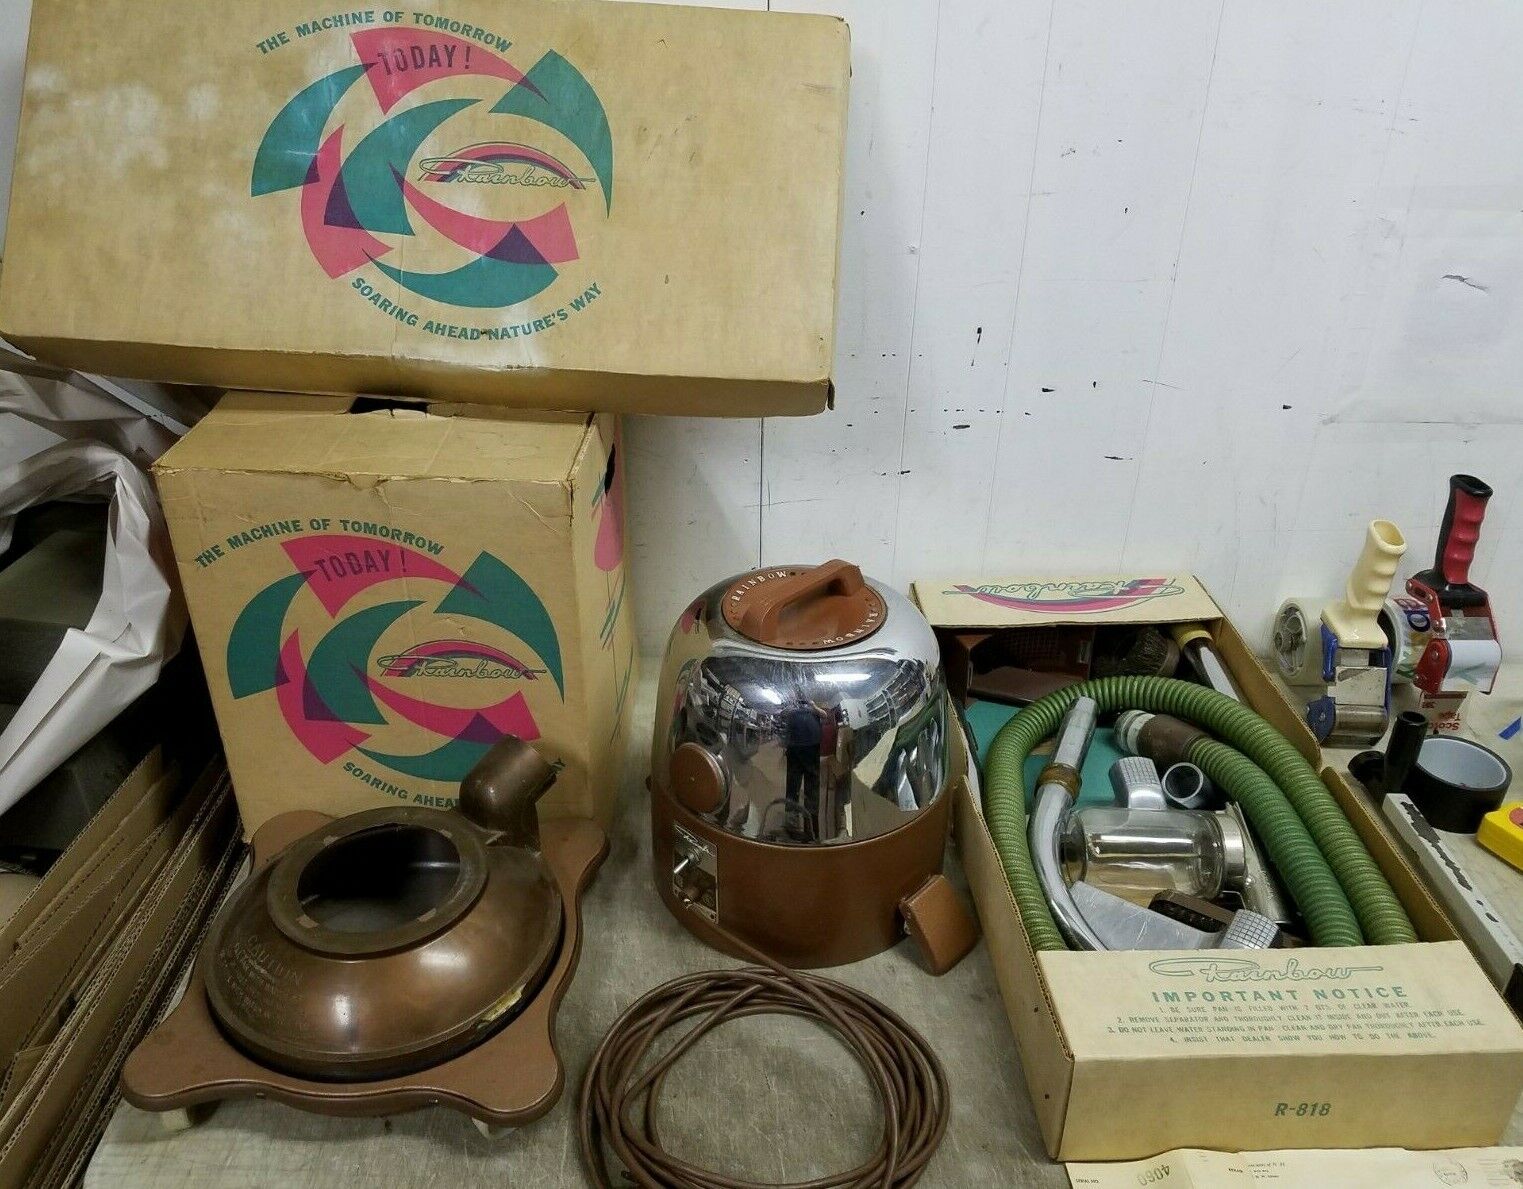 Vintage Rexair Rainbow Model D Canister Vacuum w/ Attachments in Original Boxes